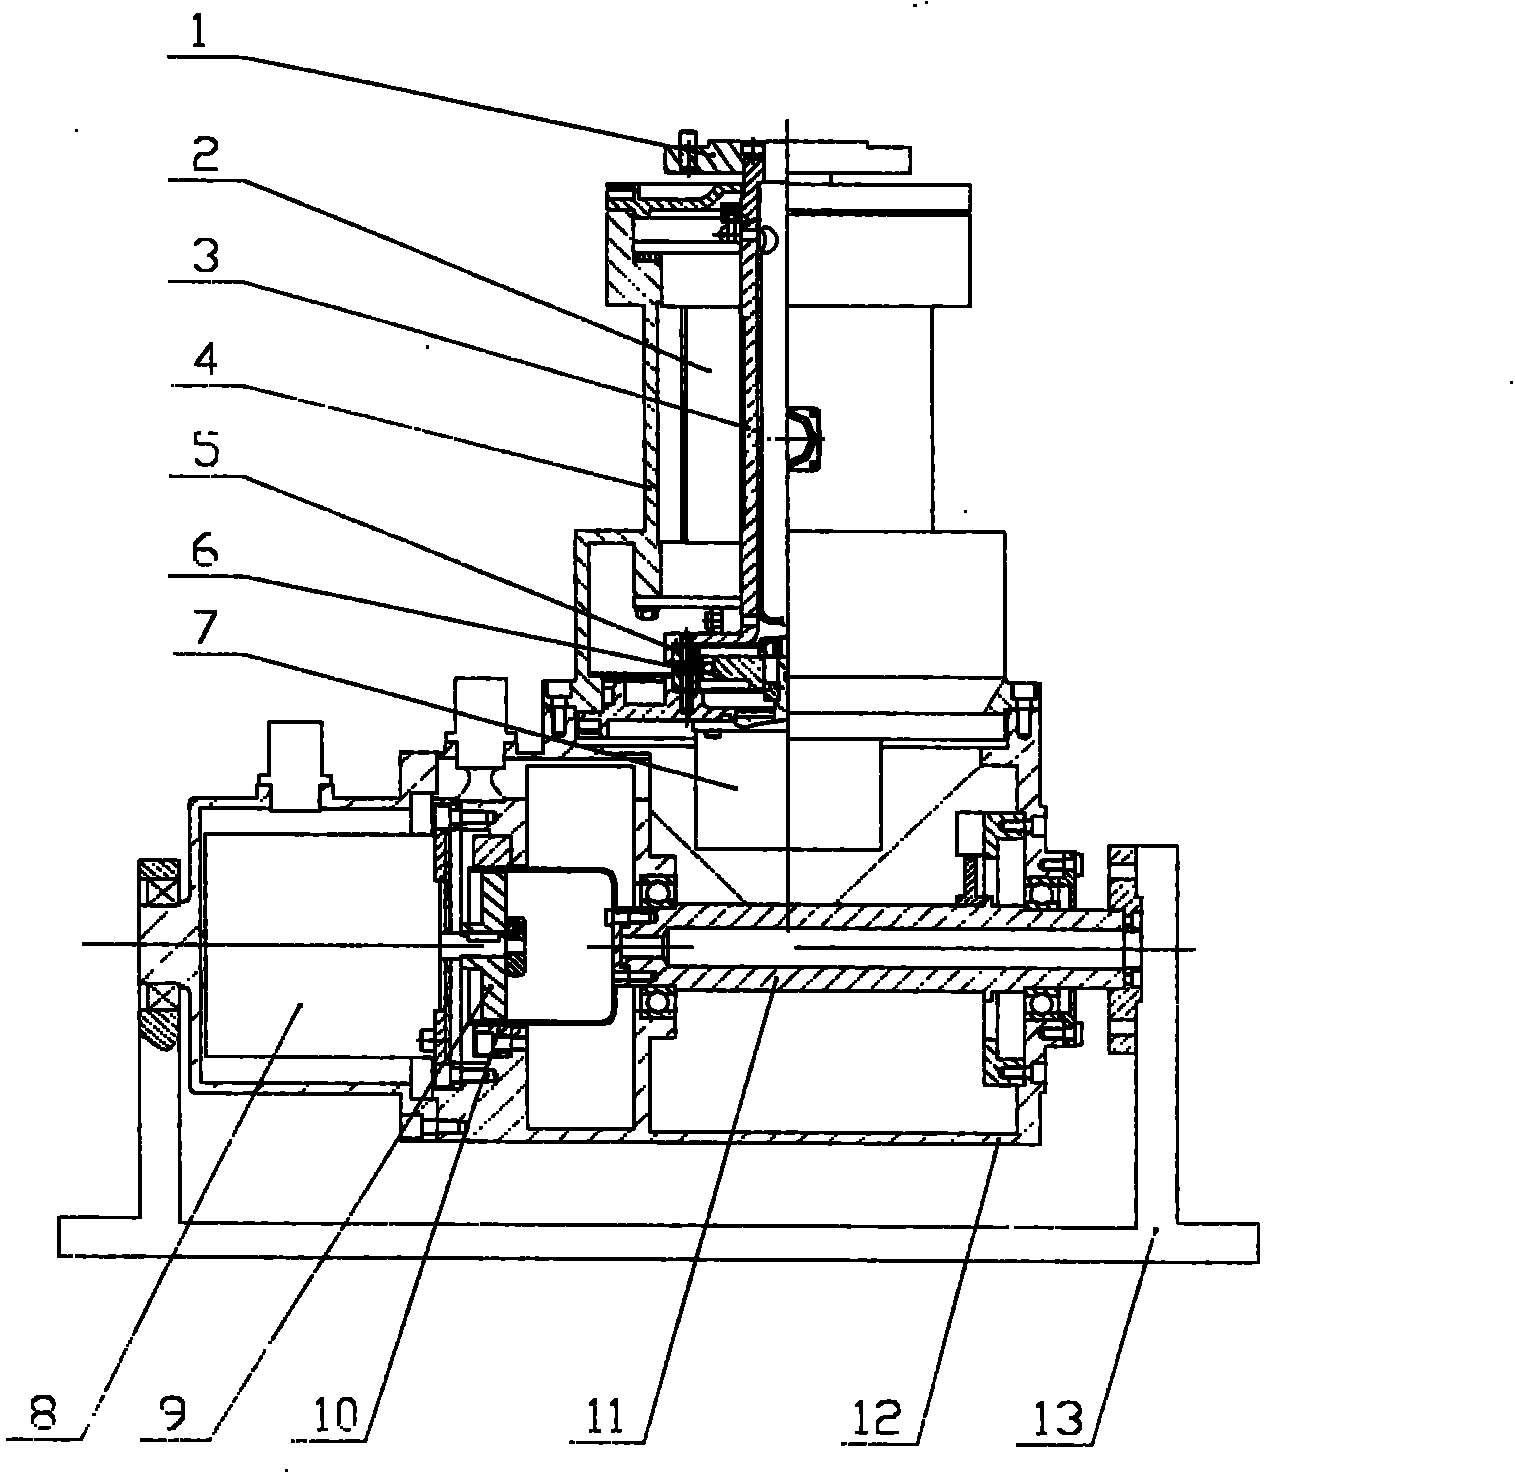 Solar cell array actuating device